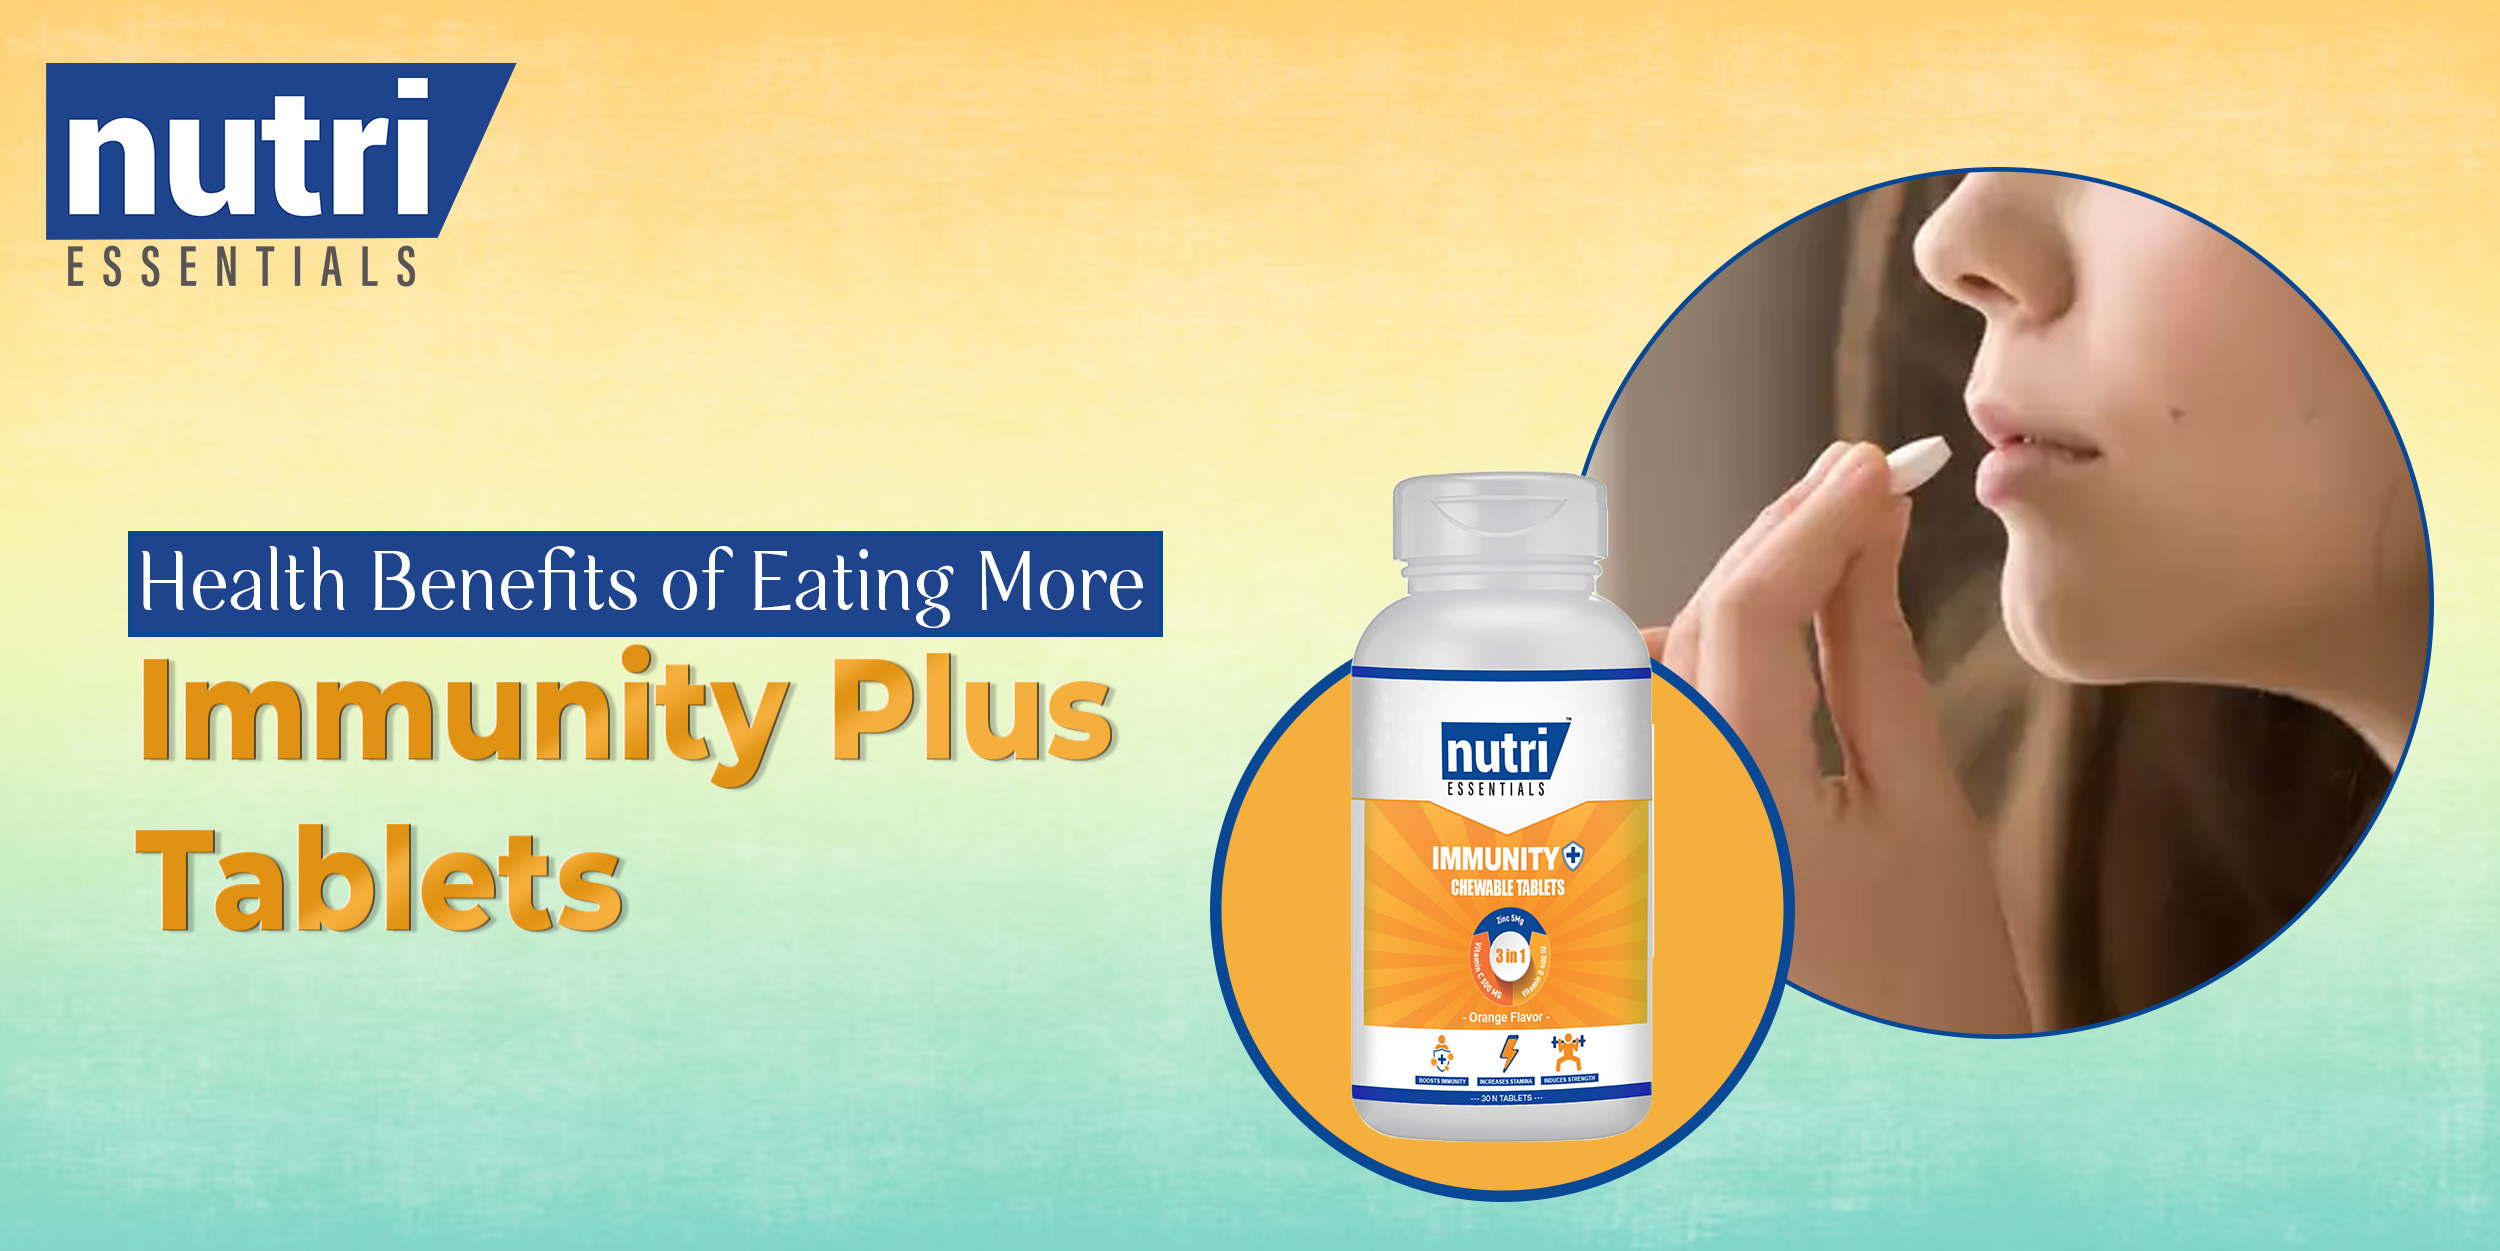 Health Benefits of Eating More Immunity Plus Tablets